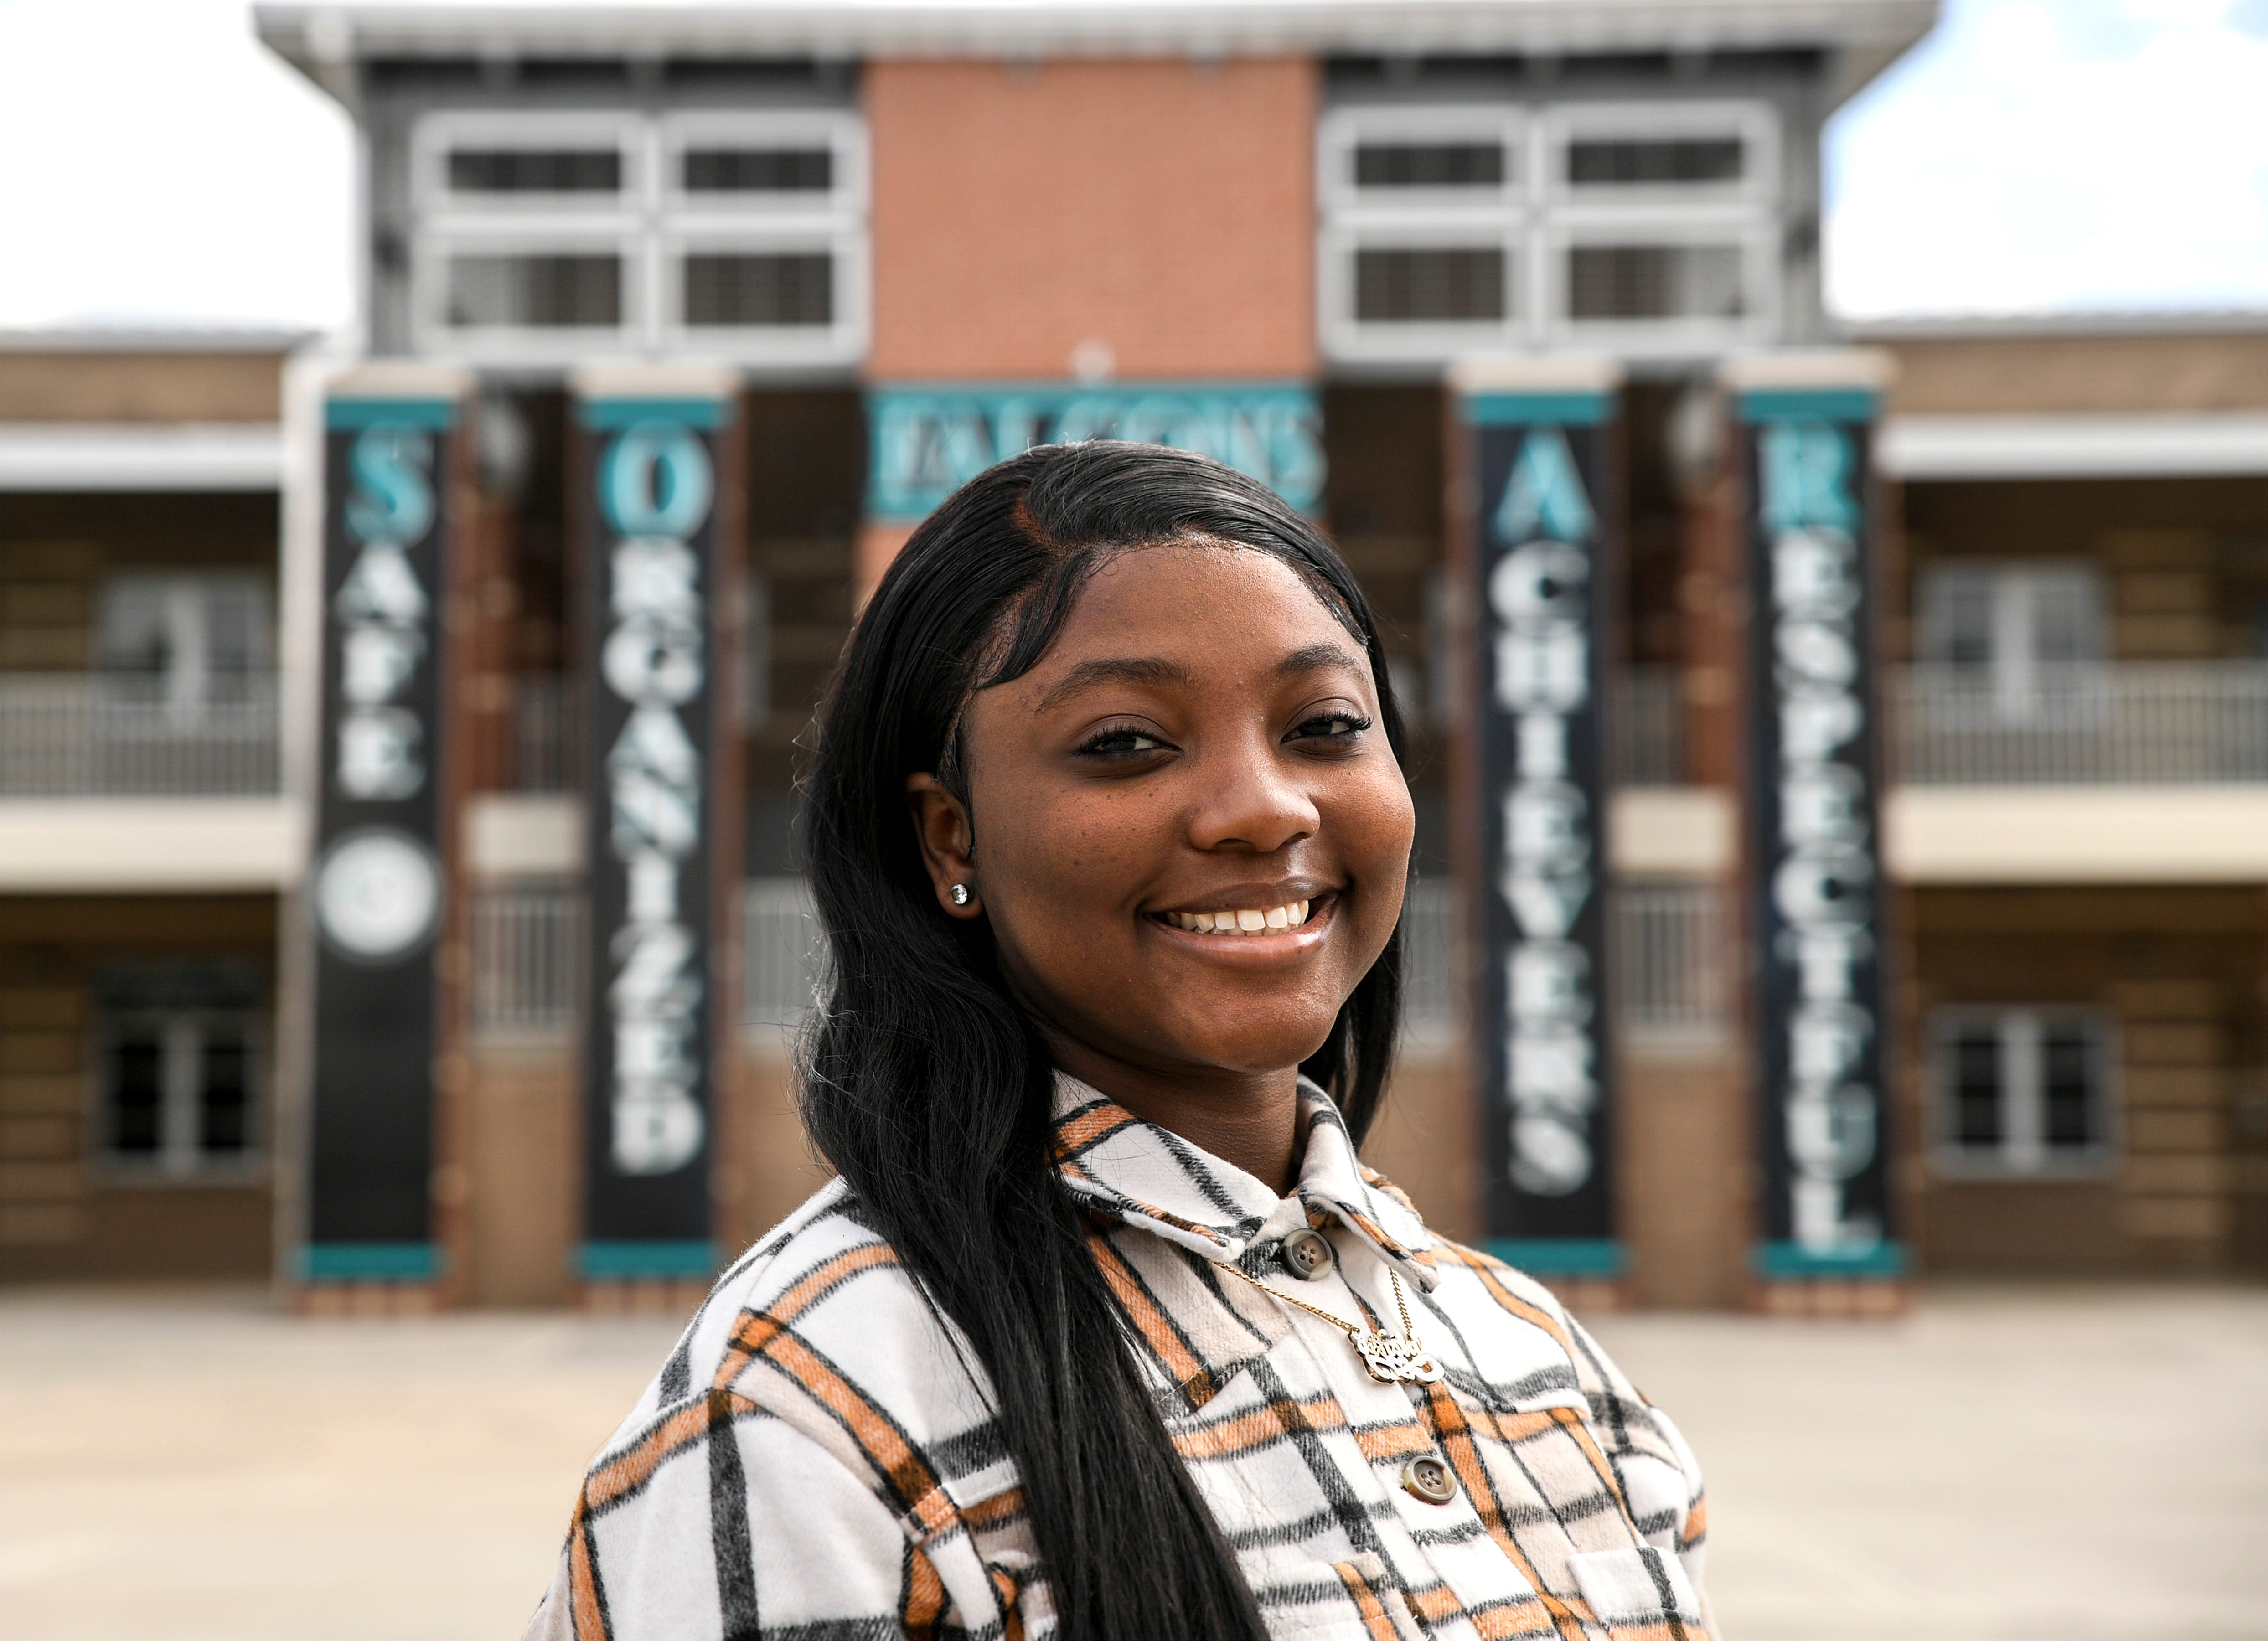 Ja'Asia Davis retook a required test for graduation over and over again, determined to end a frustrating high school experience with something to show for it.